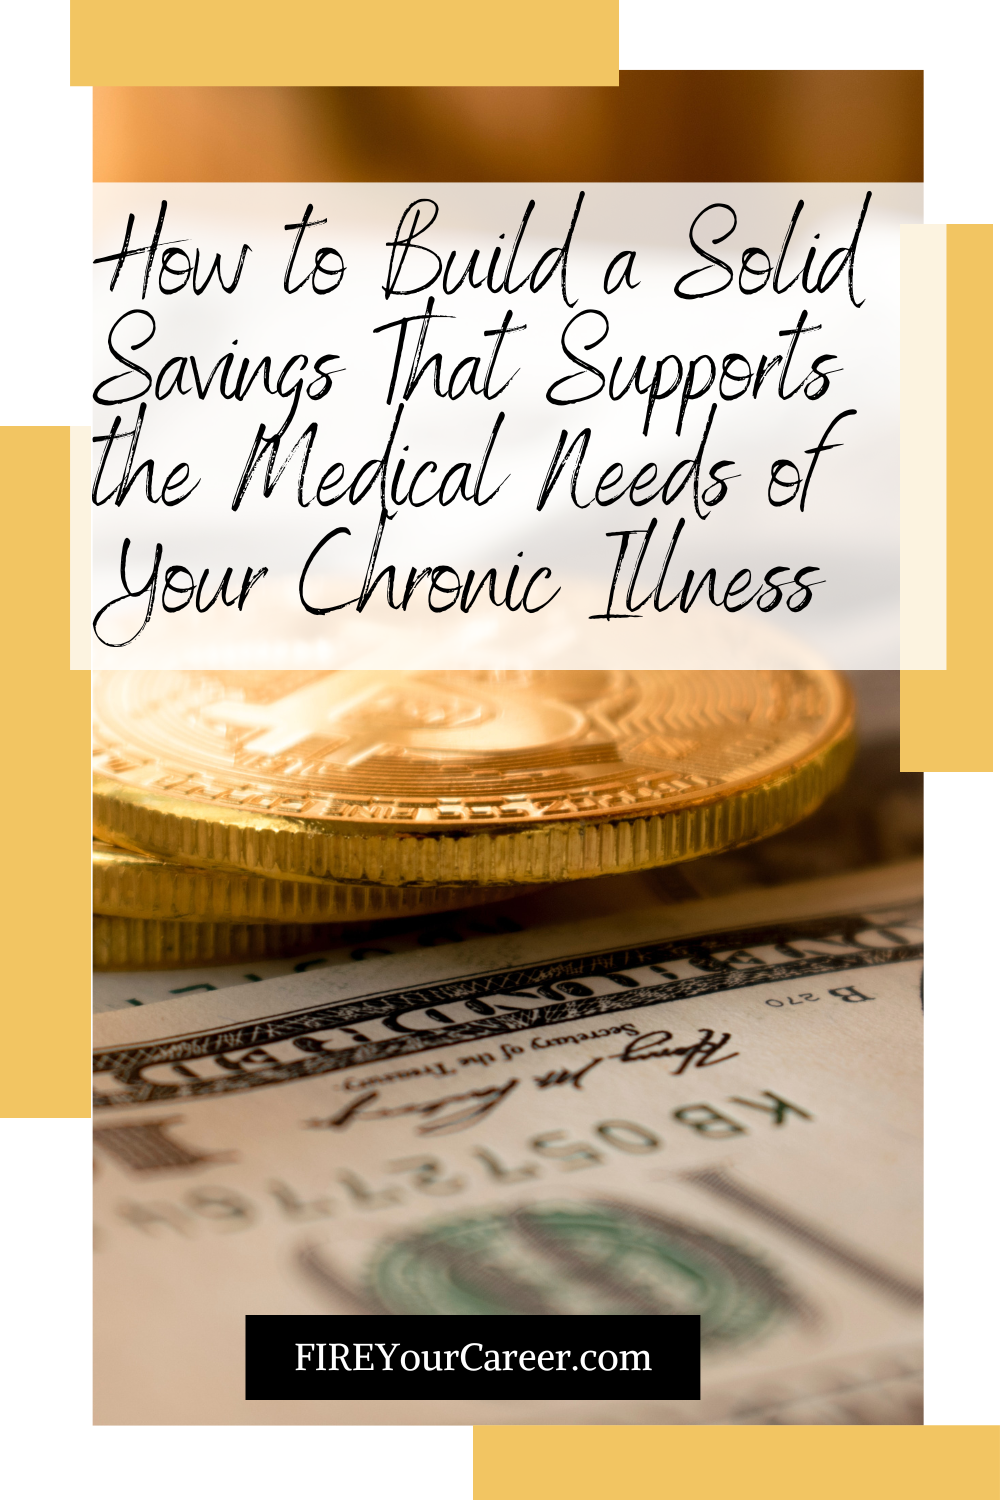 How to Build a Solid Savings That Supports the Medical Needs of Your Chronic Illness Pinterest